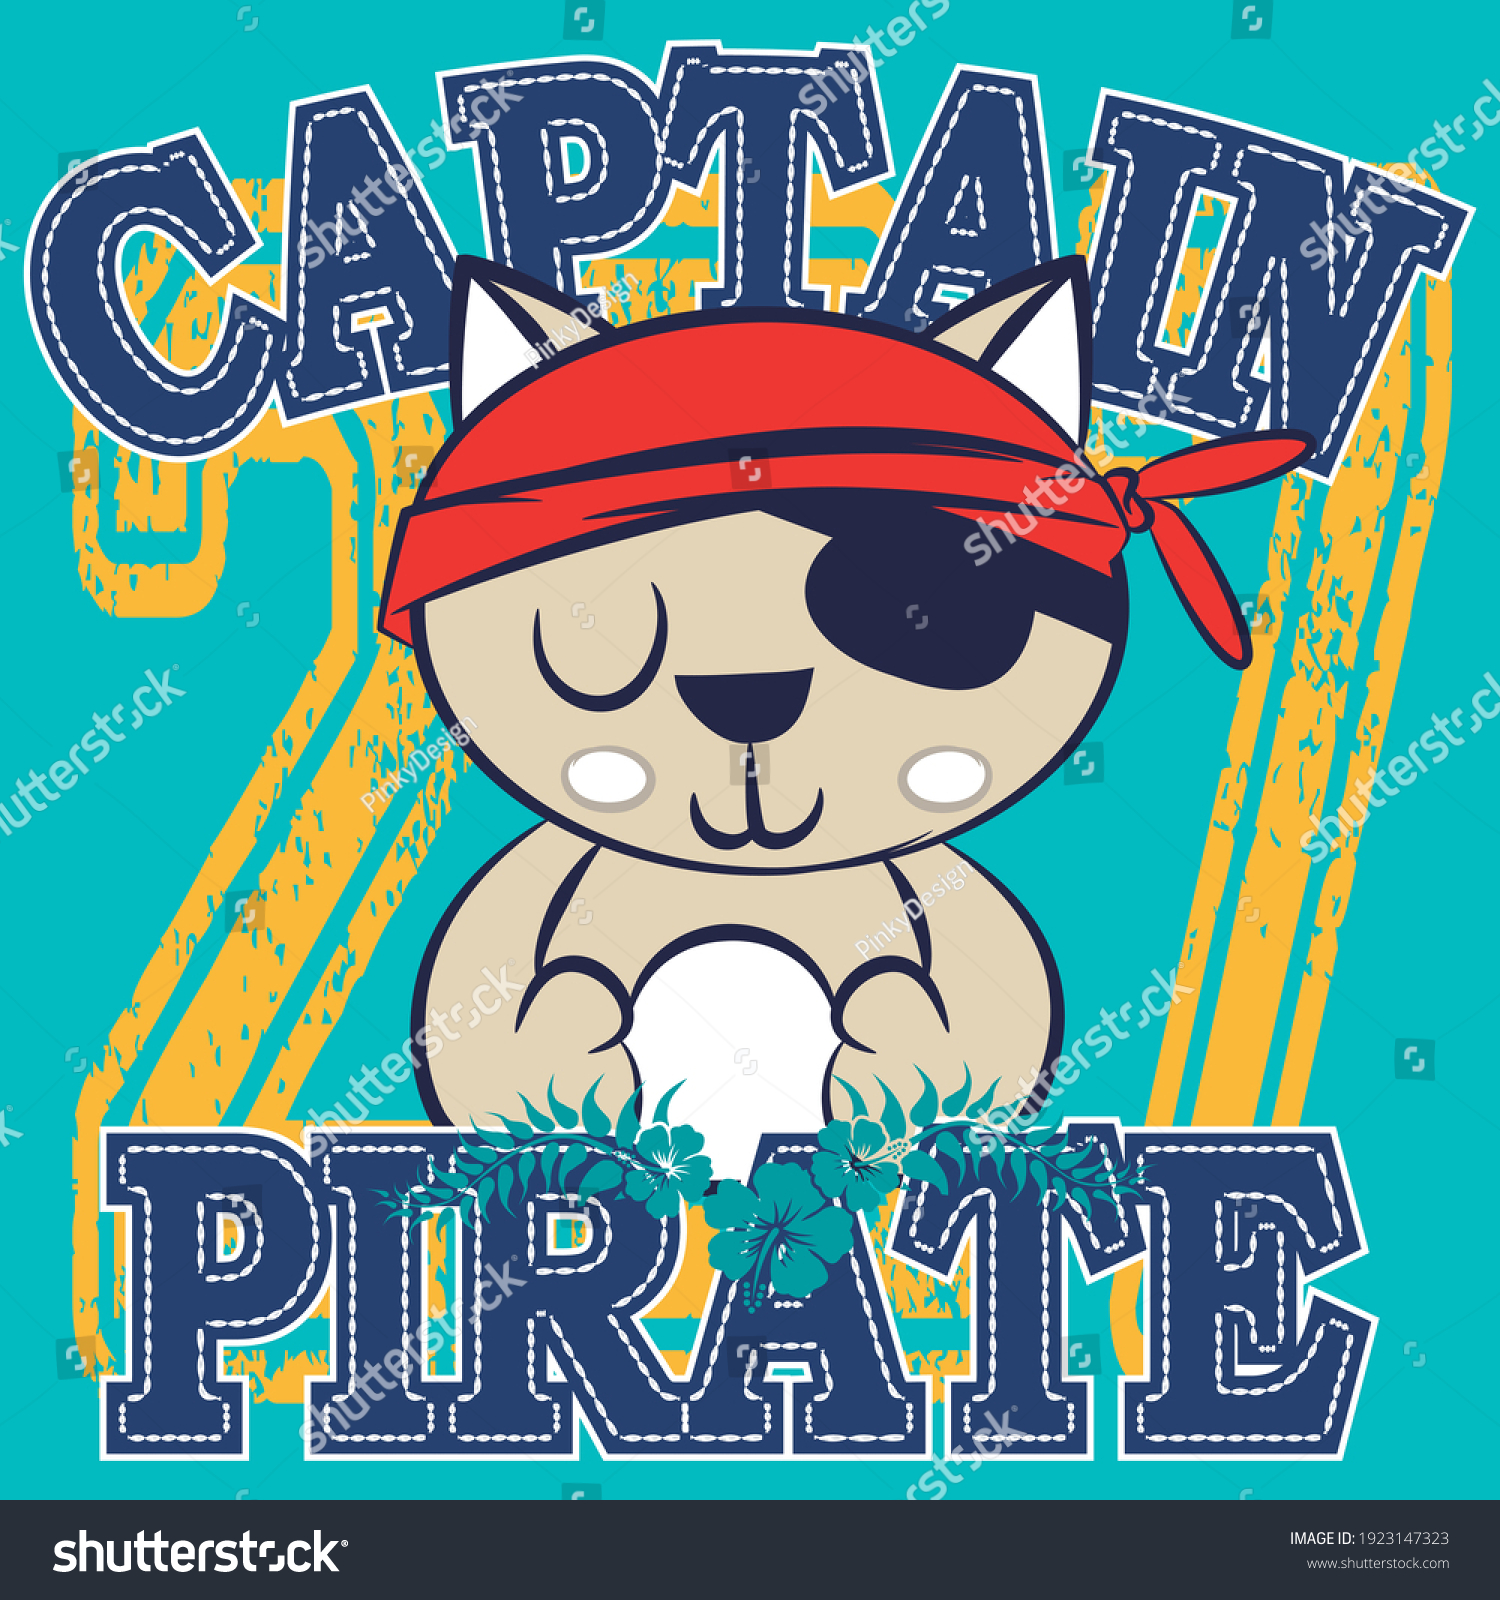 Illustration Vector Cute Cat Pirate Text Stock Vector Royalty Free